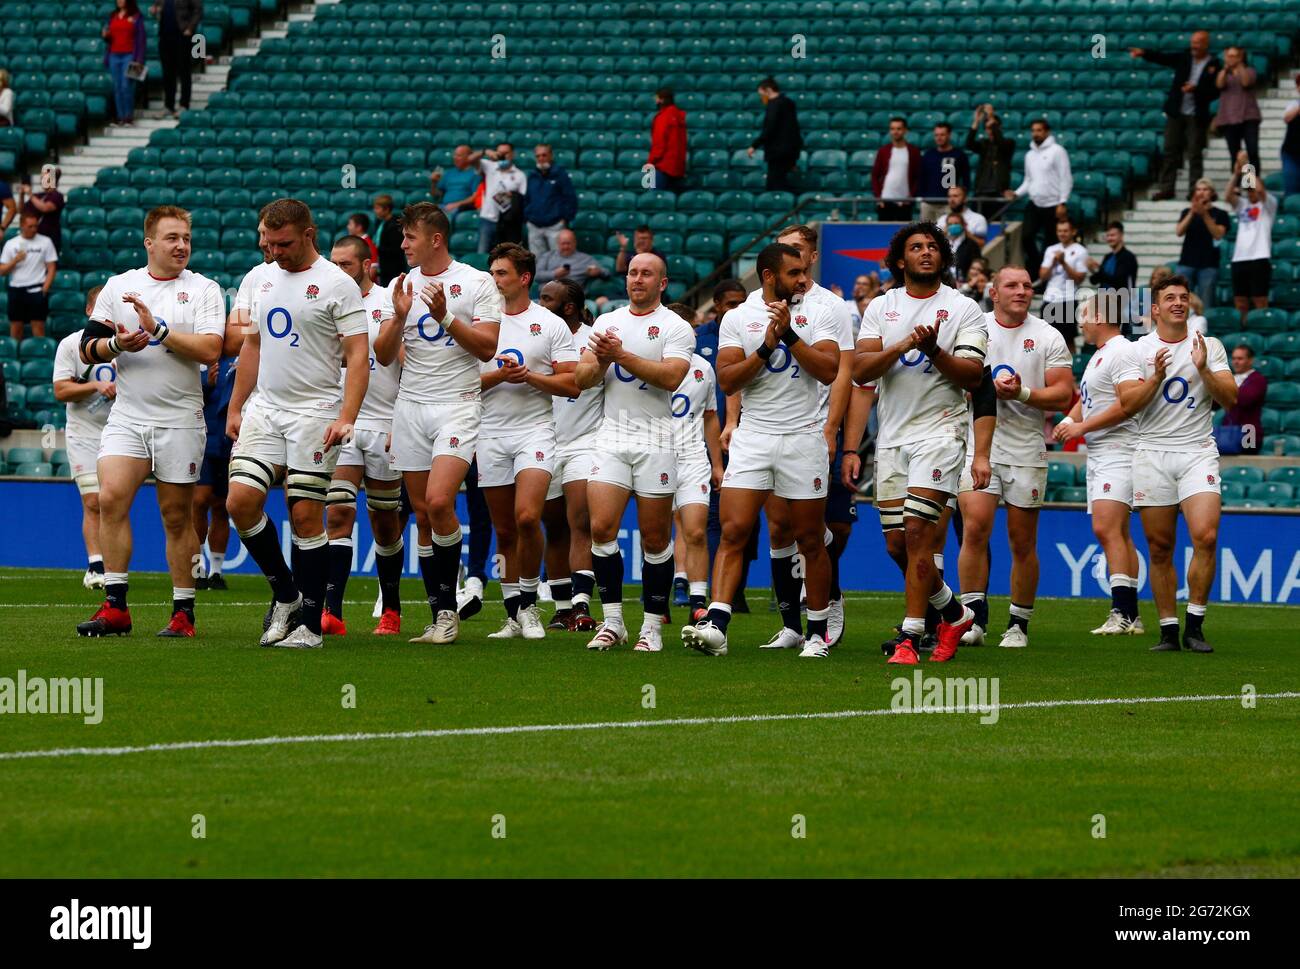 London, Inited Kingdom. 10th July, 2021. LONDON, ENGLAND - JULY 10: England Players afterInternational Friendly between England and Canada at Twickenham Stadium, London, UK on 10th July 2021 Credit: Action Foto Sport/Alamy Live News Stock Photo